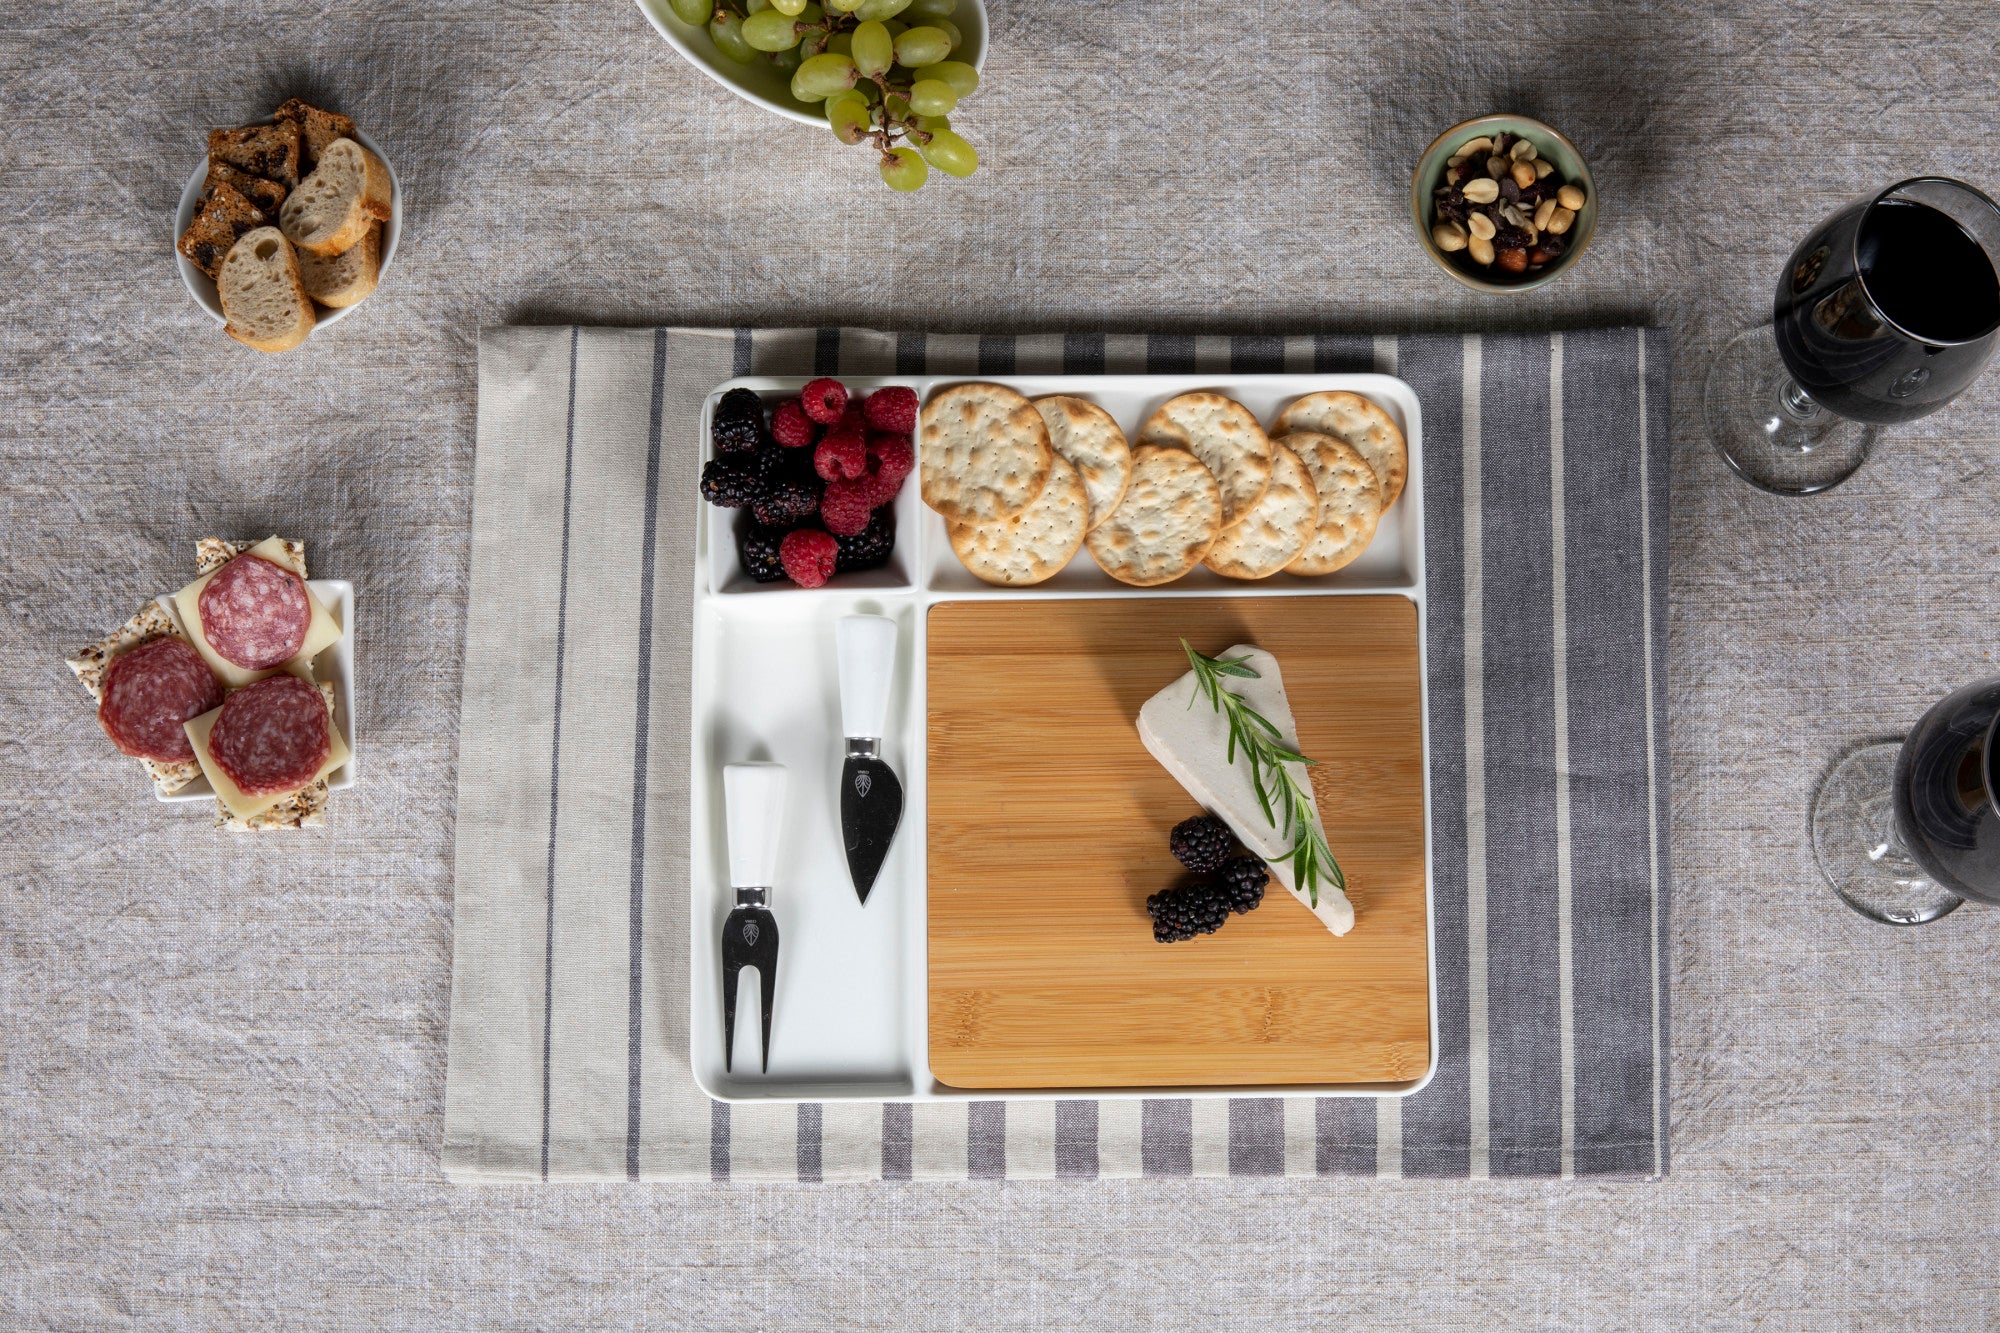 Los Angeles Chargers - Peninsula Cutting Board & Serving Tray